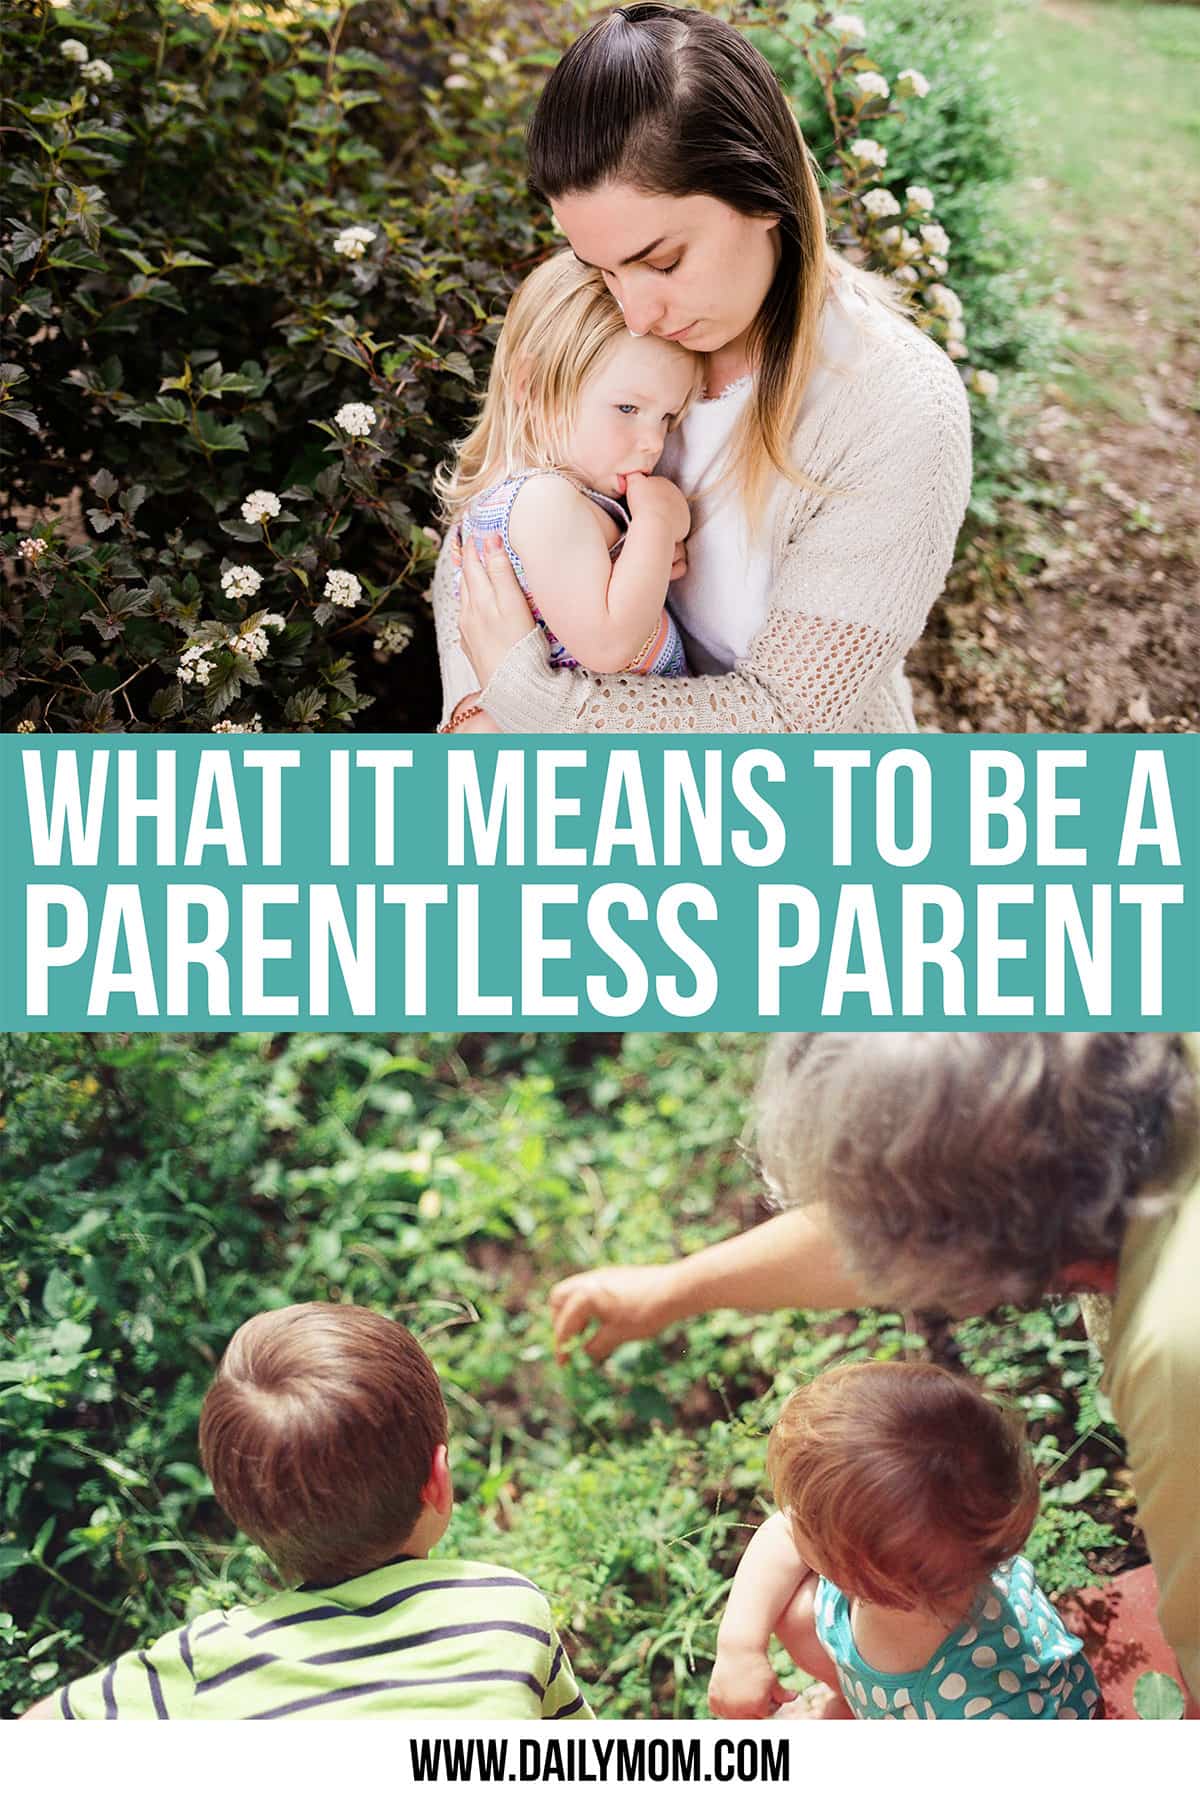 Estranged With Family: Parentless Parenting